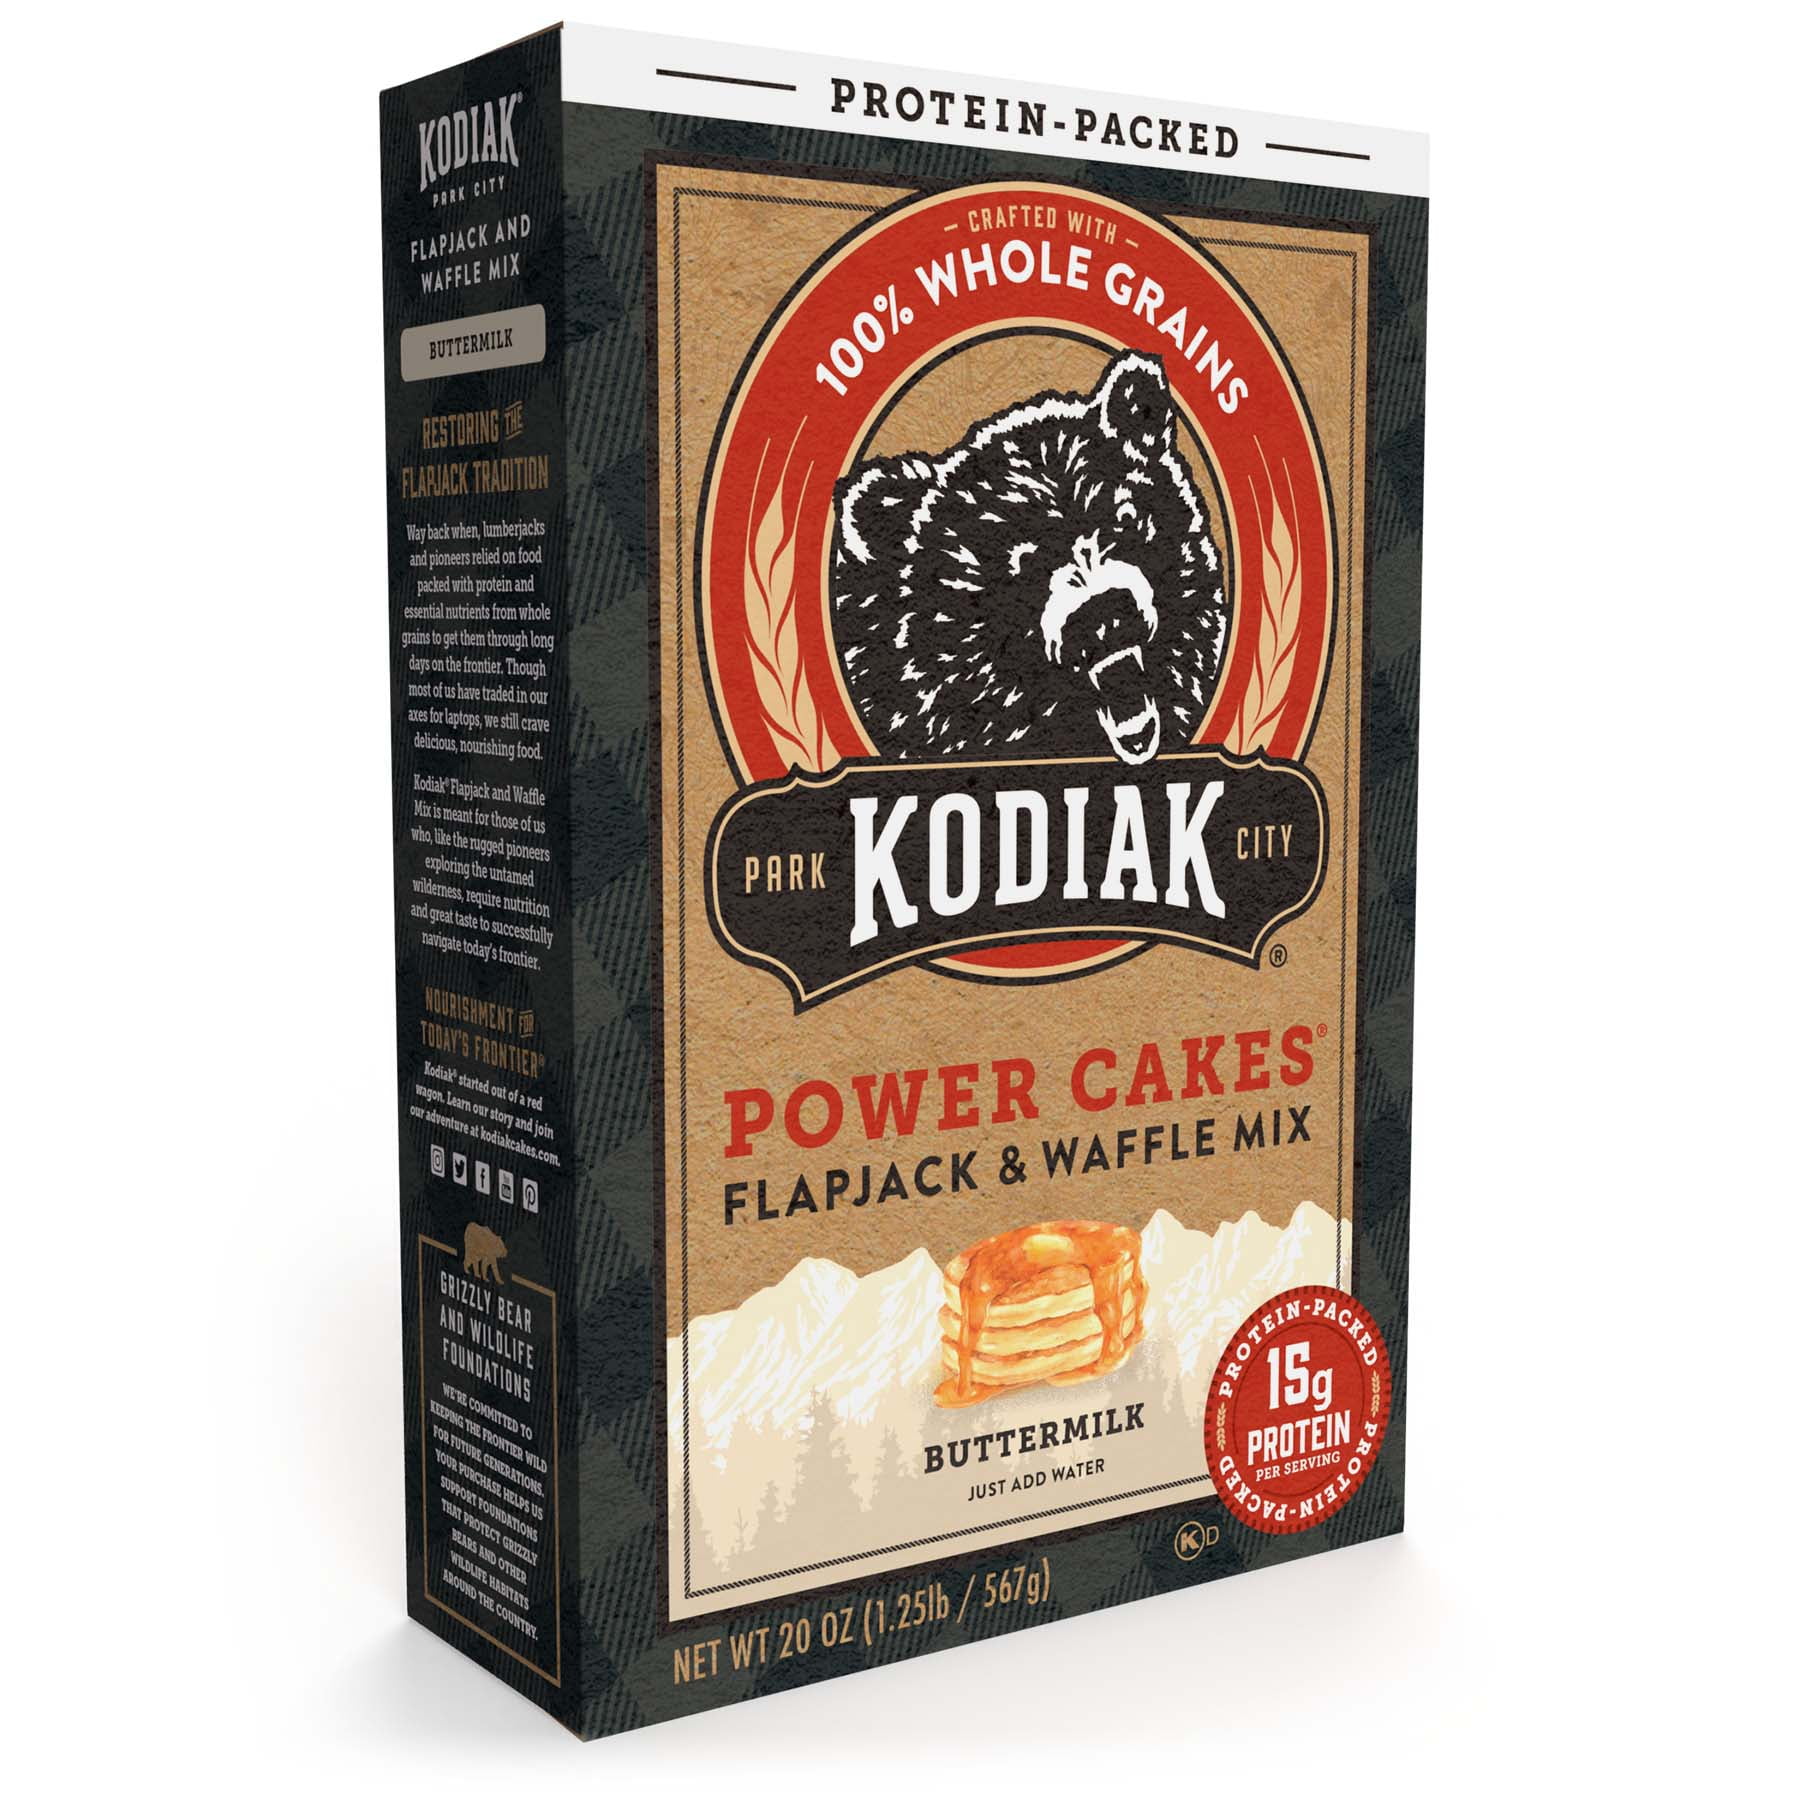 Kodiak Protein-Packed Power Cakes Buttermilk Flapjack and Waffle Mix, 20 oz